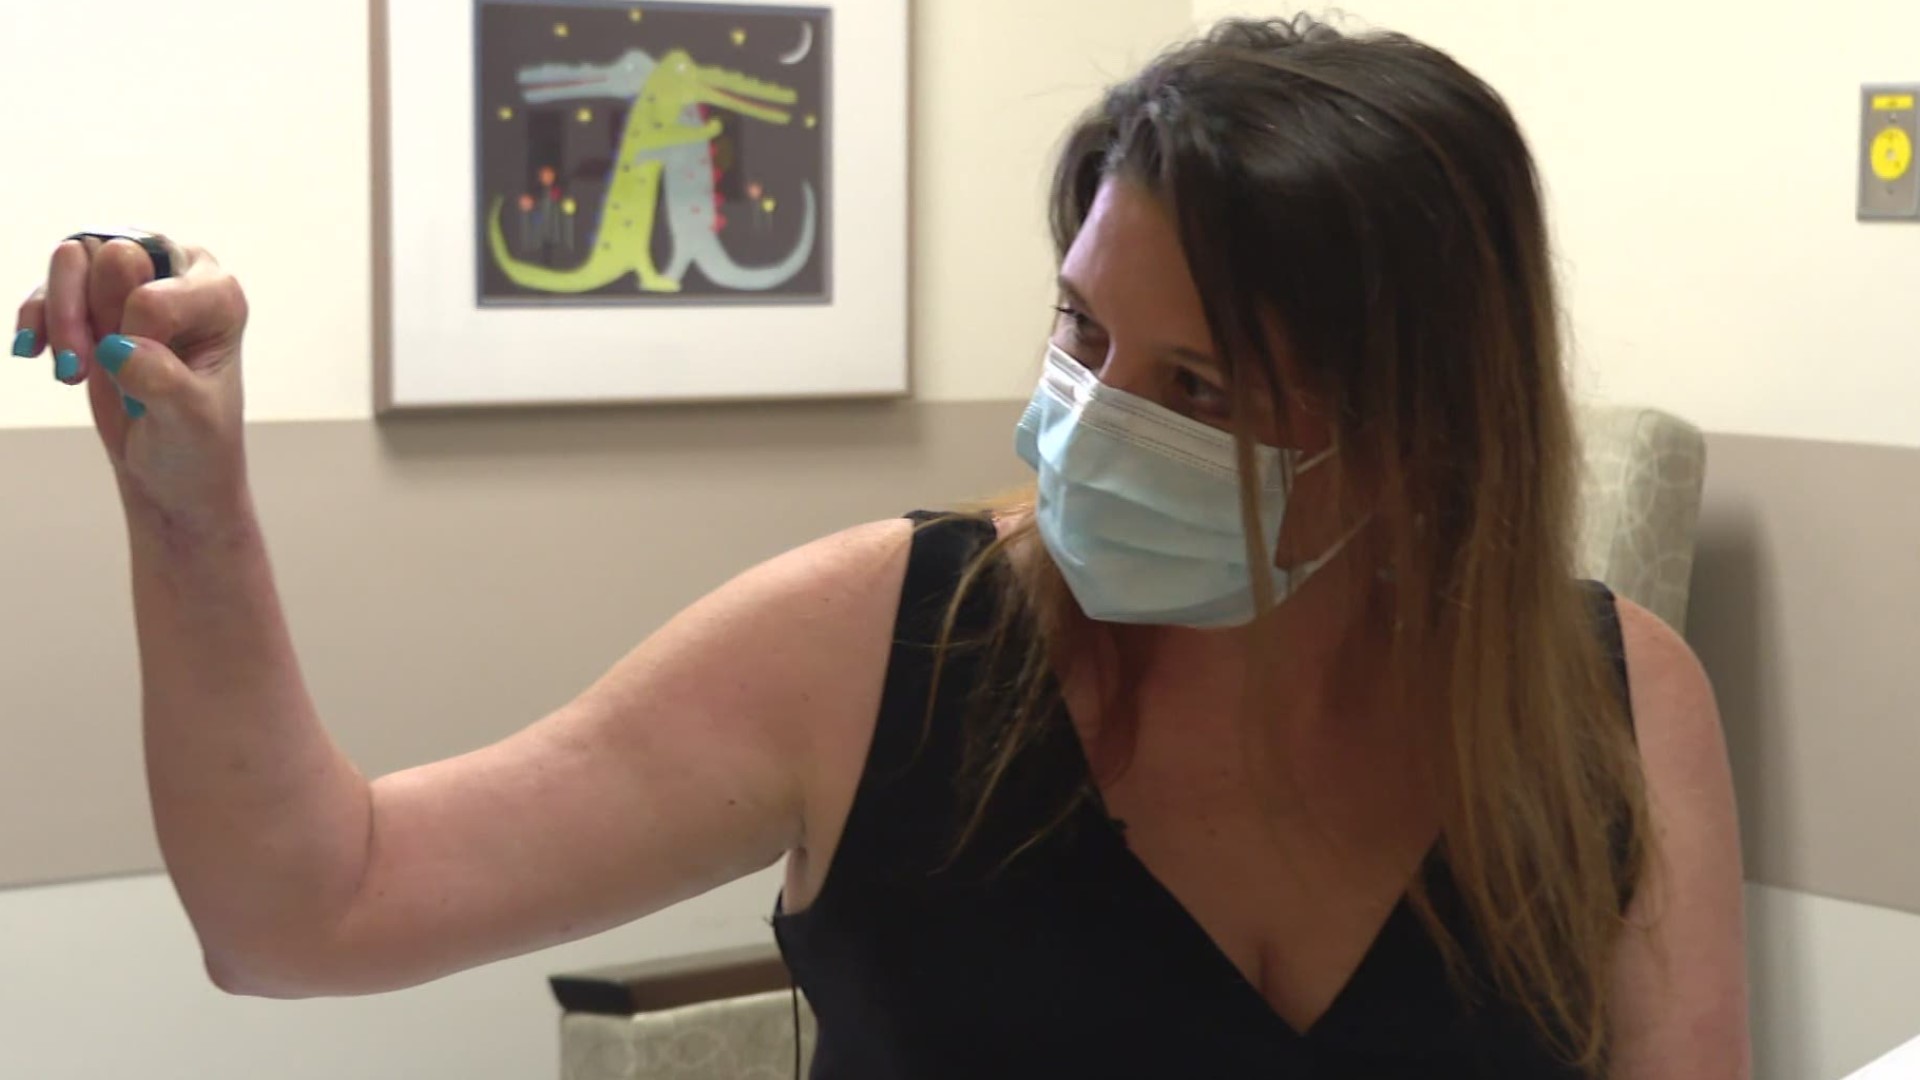 Kristi Anema says she's grateful doctors were able to save her hand after traumatic injuries.